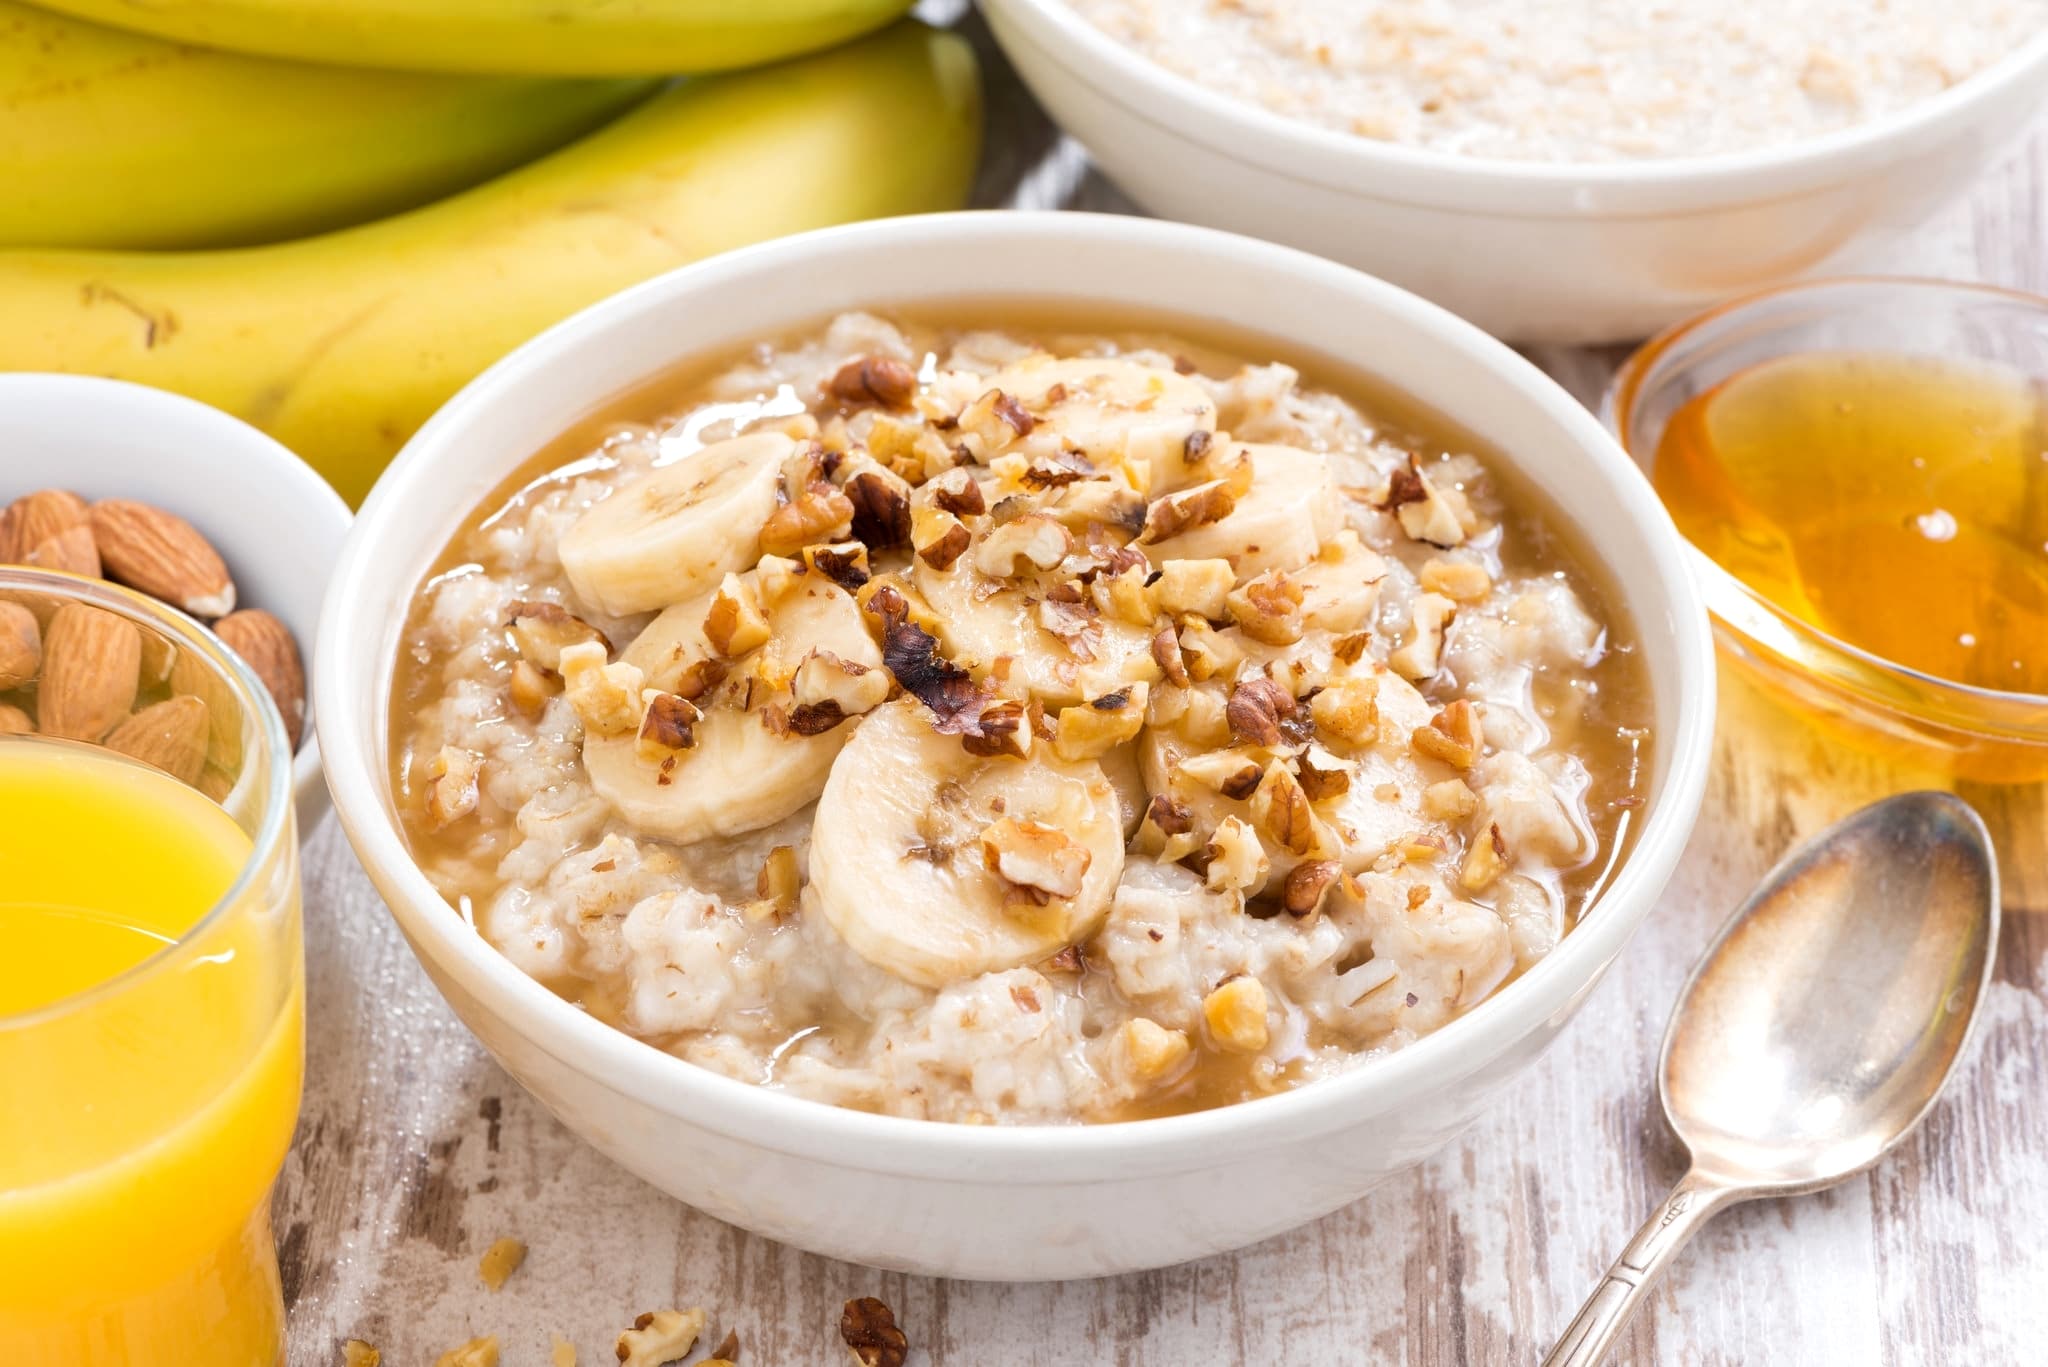 For people with diabetes, oats may be a healthy everyday addition to a diet in moderation. There is no one-size-fits-all diabetes diet, however, and while eating oats, people should track their blood sugar levels to determine if they are the right option. The best are steel-cut or rolled whole grain oats. For any added ingredients, be sure to look out. Finally, oats are not a cure for diabetes, although they are nutritious. When implemented into a diabetic meal plan, they will help manage symptoms, but nothing can replace adequate diabetes medical care.